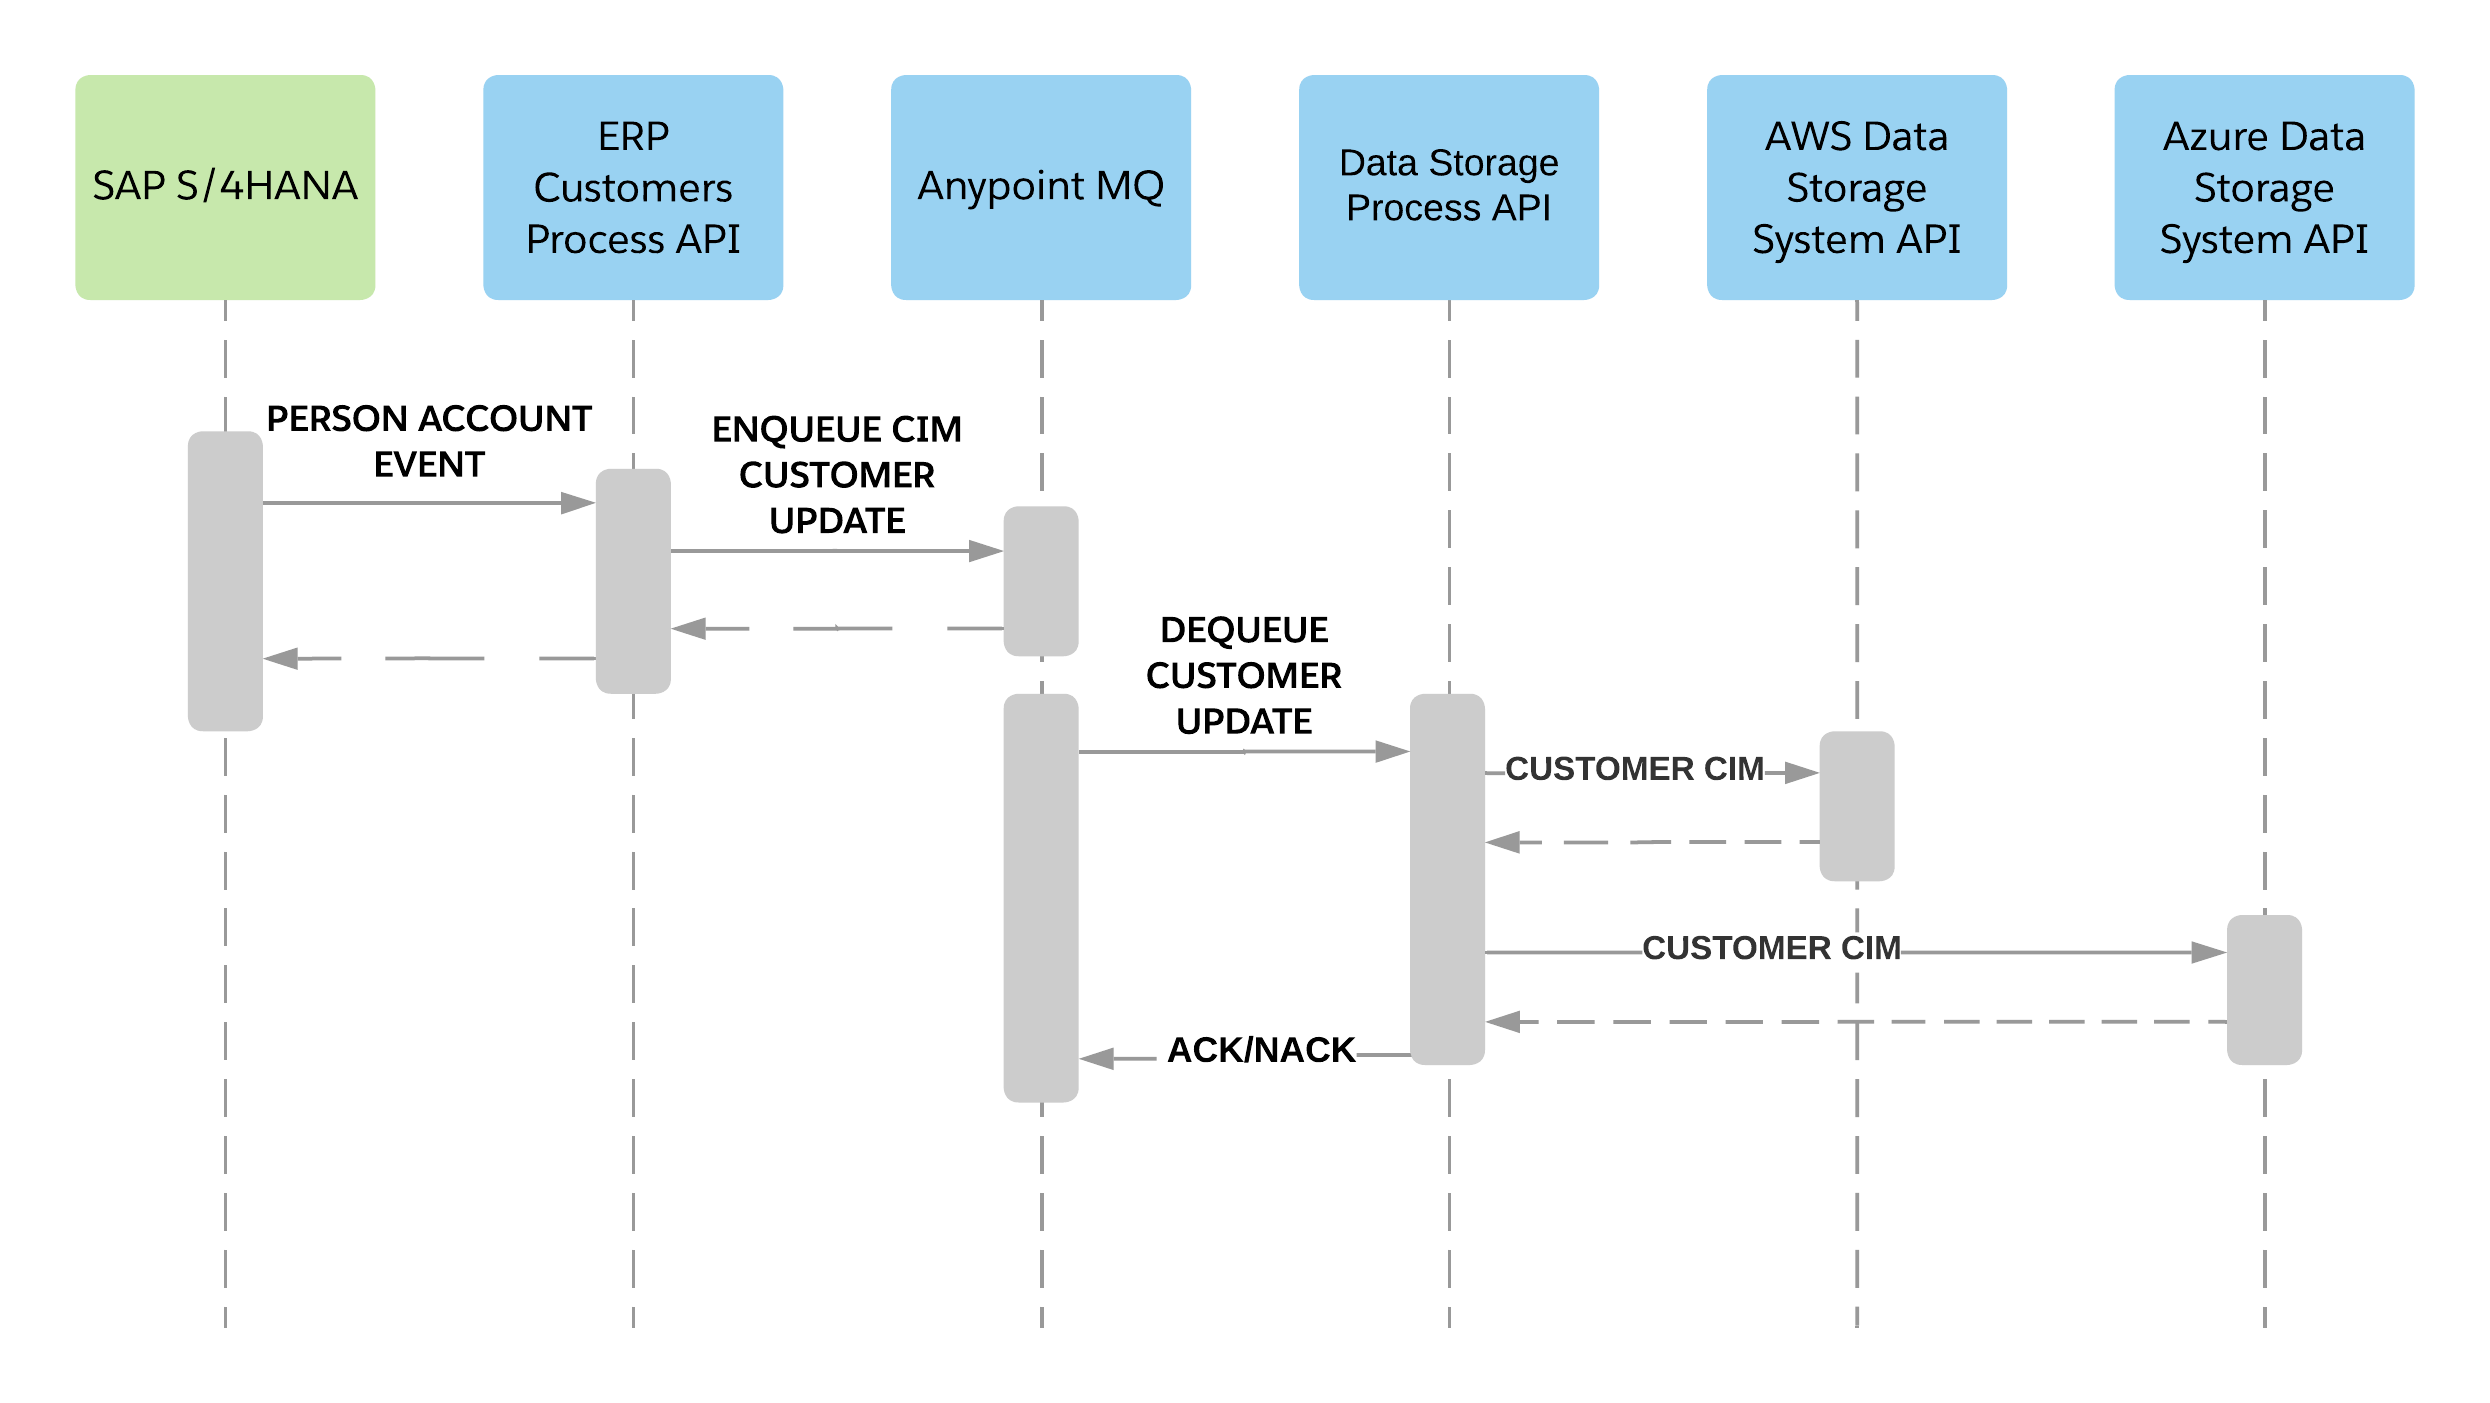 sap-datalakes-sap-customer-update-sequence-diagram.png